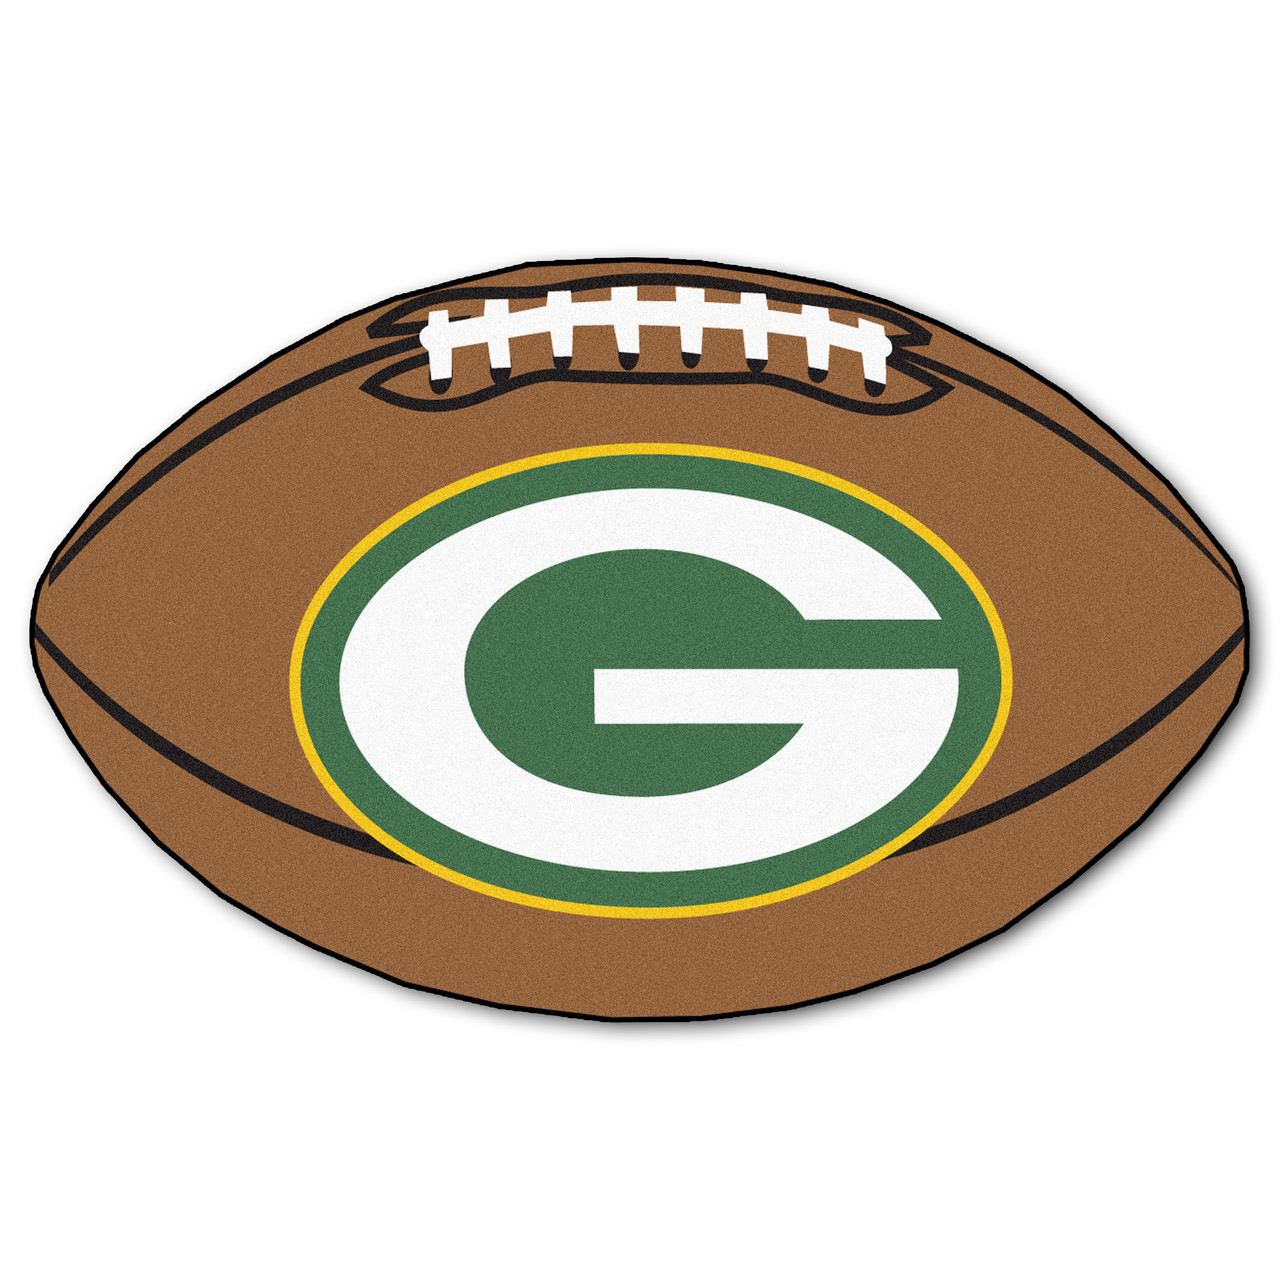 green bay packers old logo